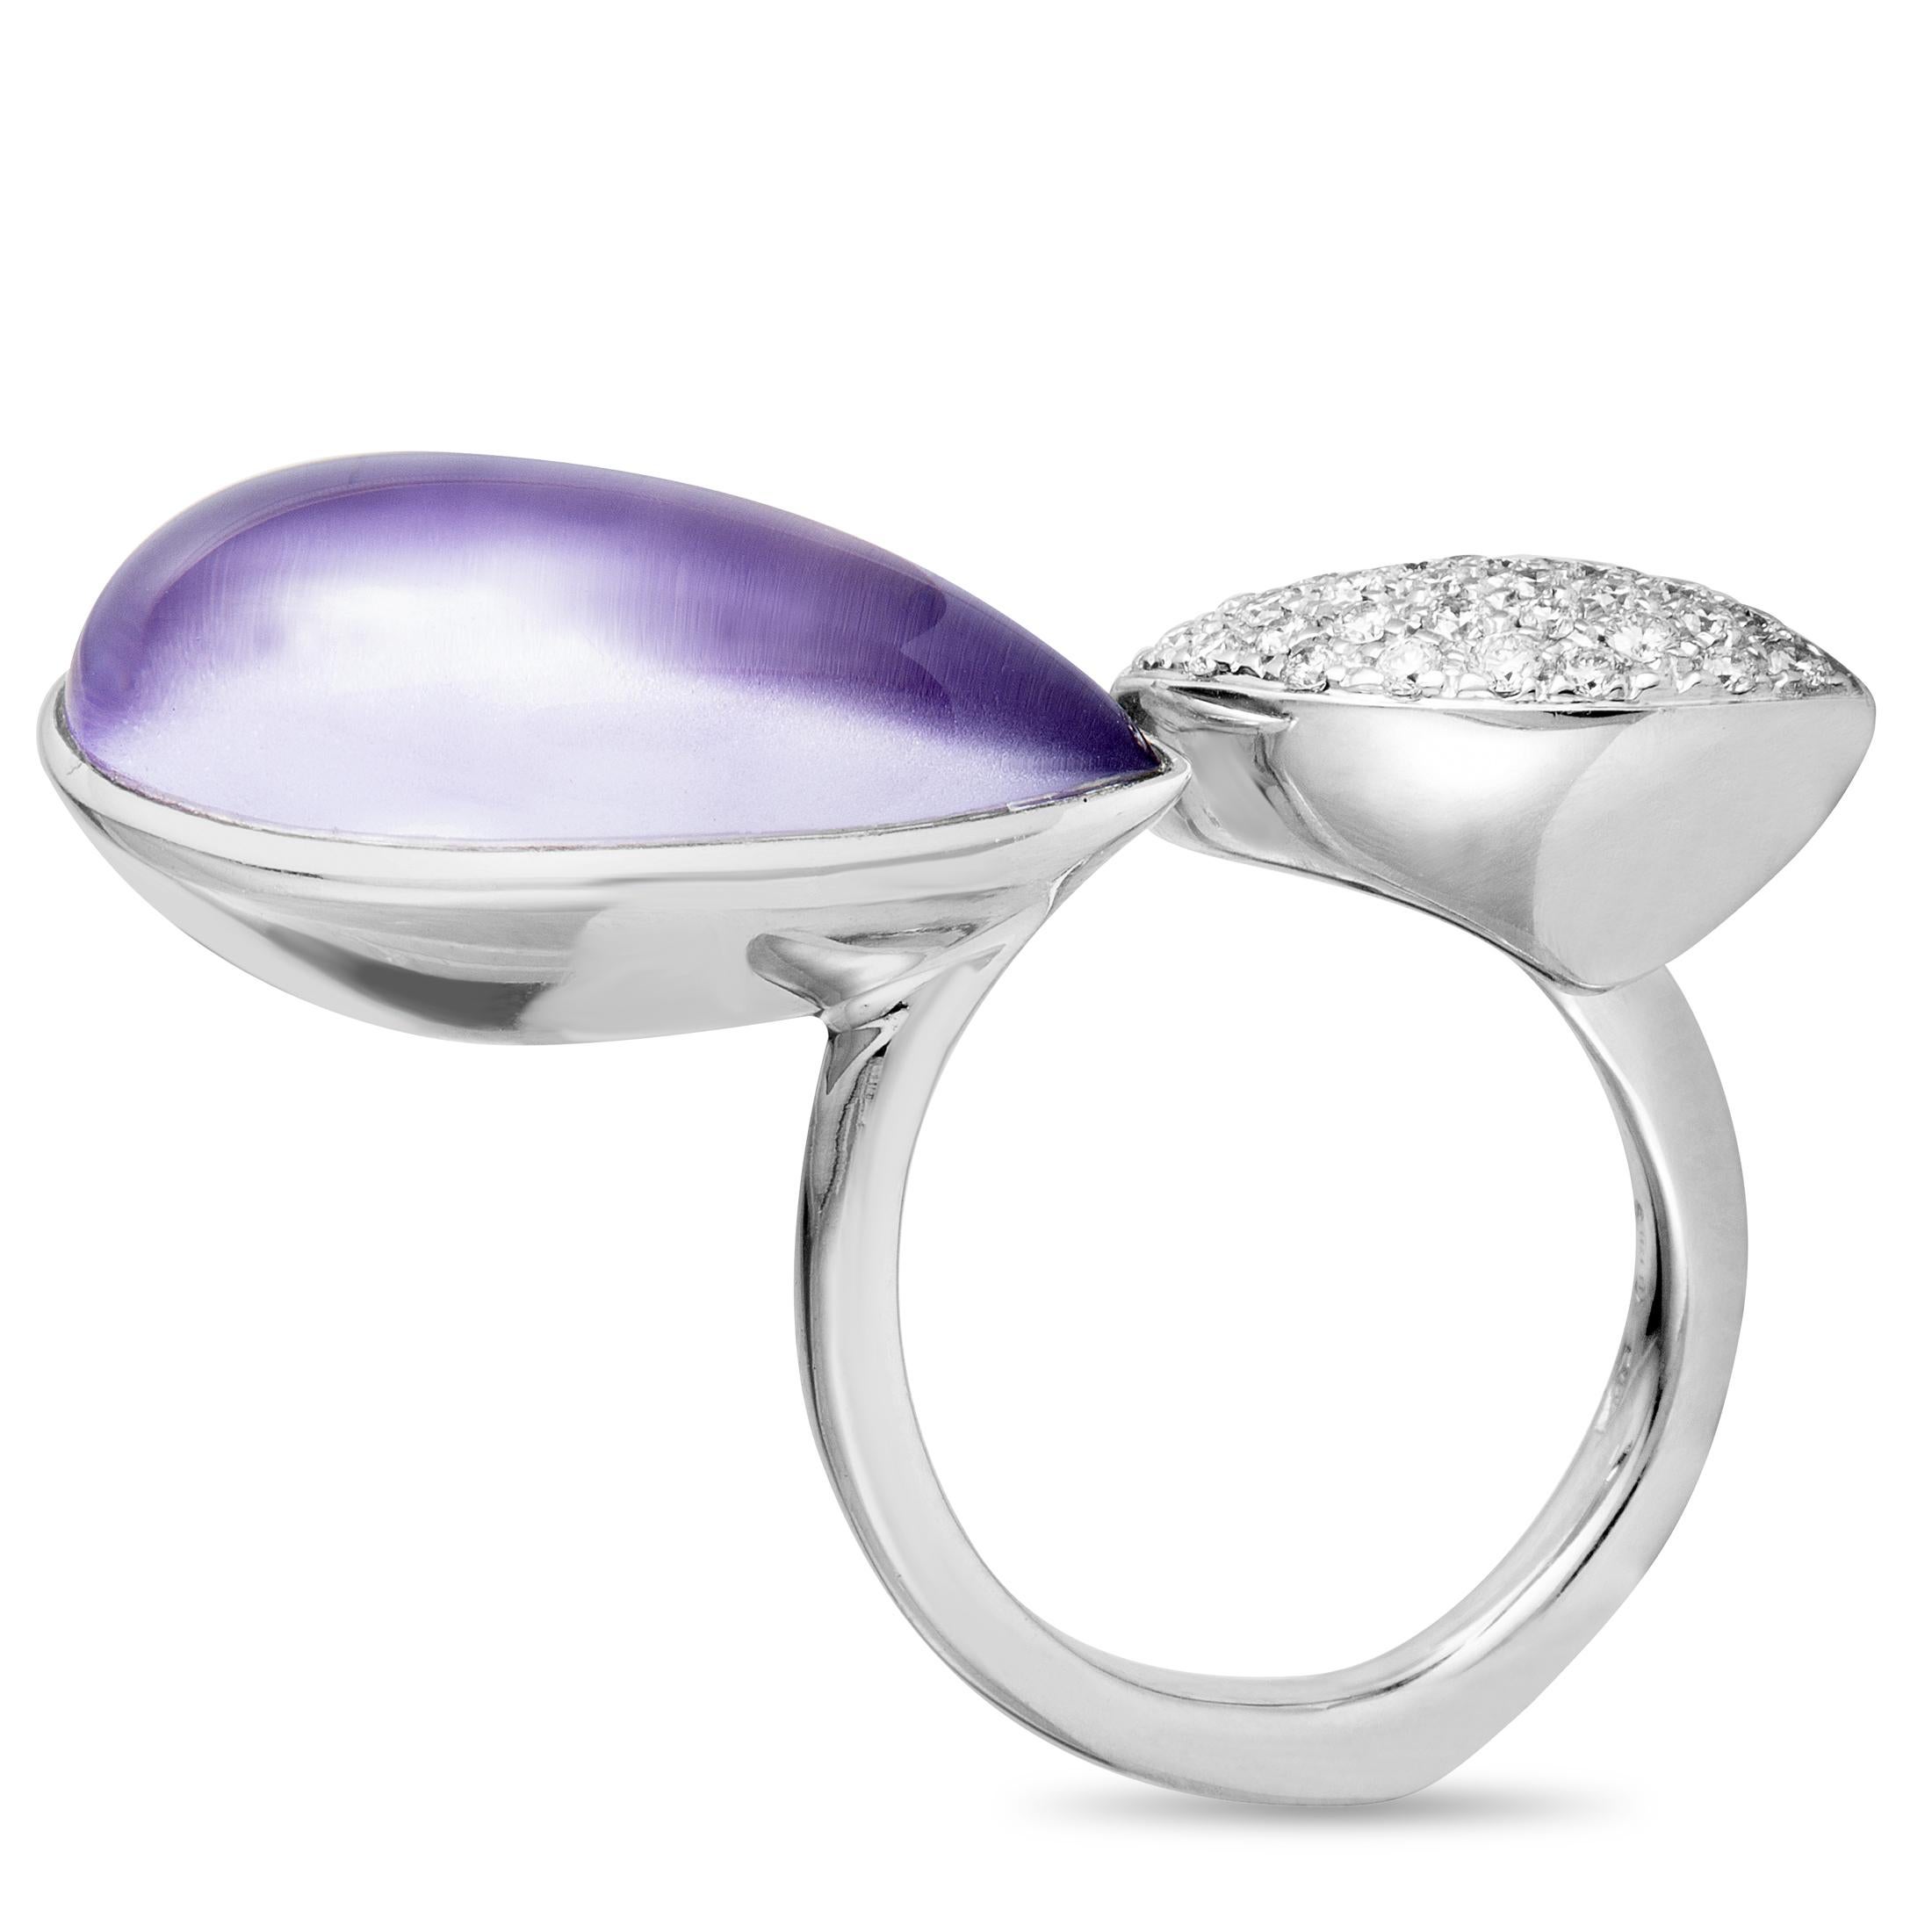 A sublime vision of refined elegance, this gorgeous ring will add a stylish touch to any ensemble of yours. The ring is splendidly made of 18K white gold and it is decorated with an exquisite amethyst and with sparkling diamonds that weigh 0.40